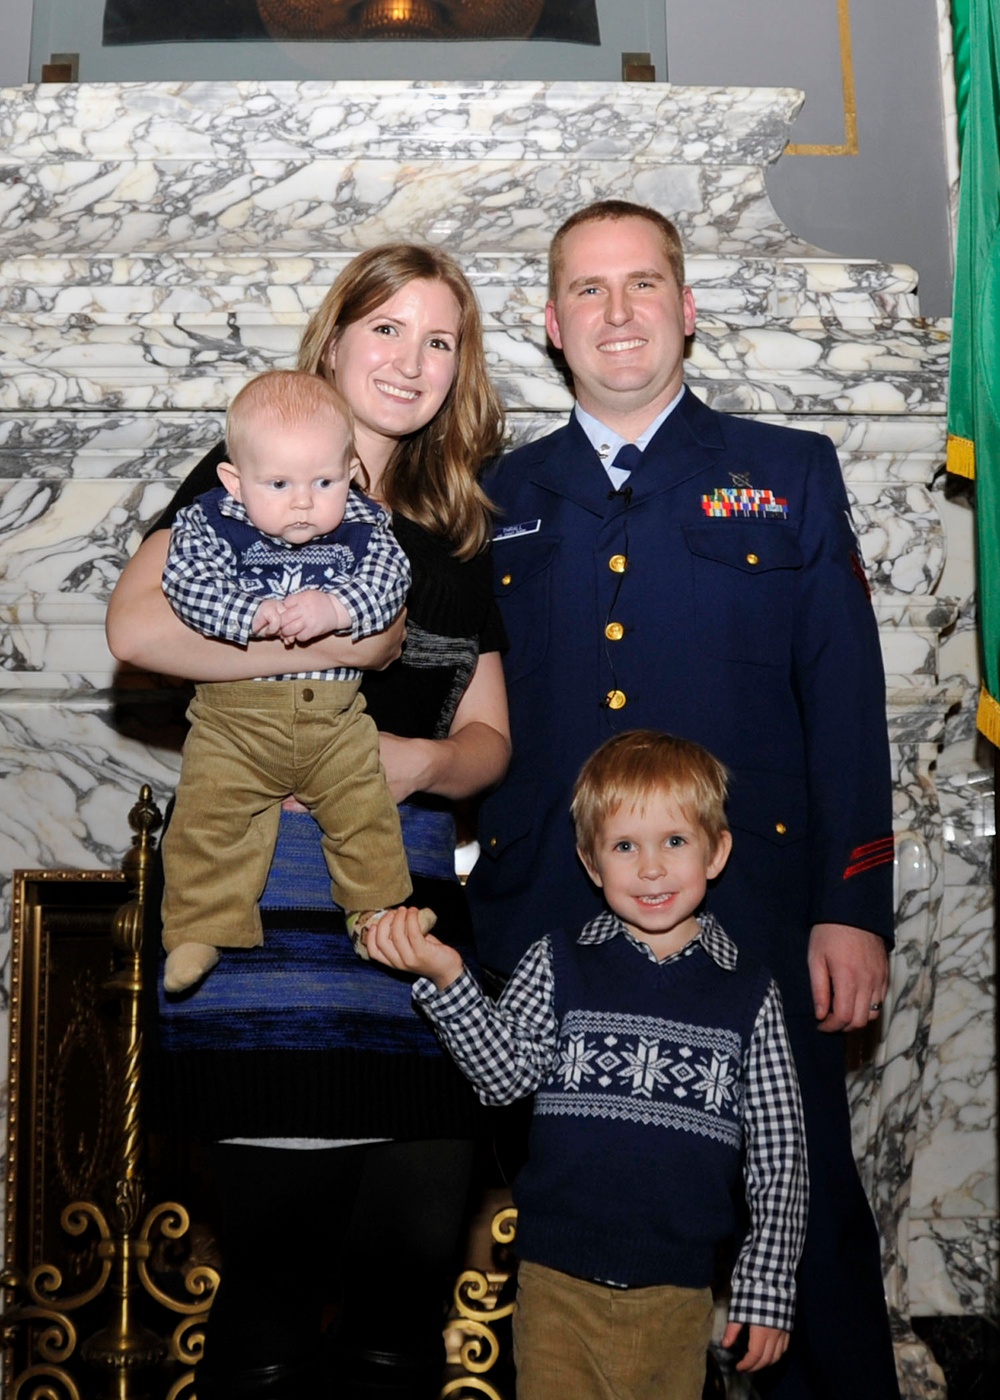 Coast Guard surfman honored by Washington State governor at tree lighting ceremony